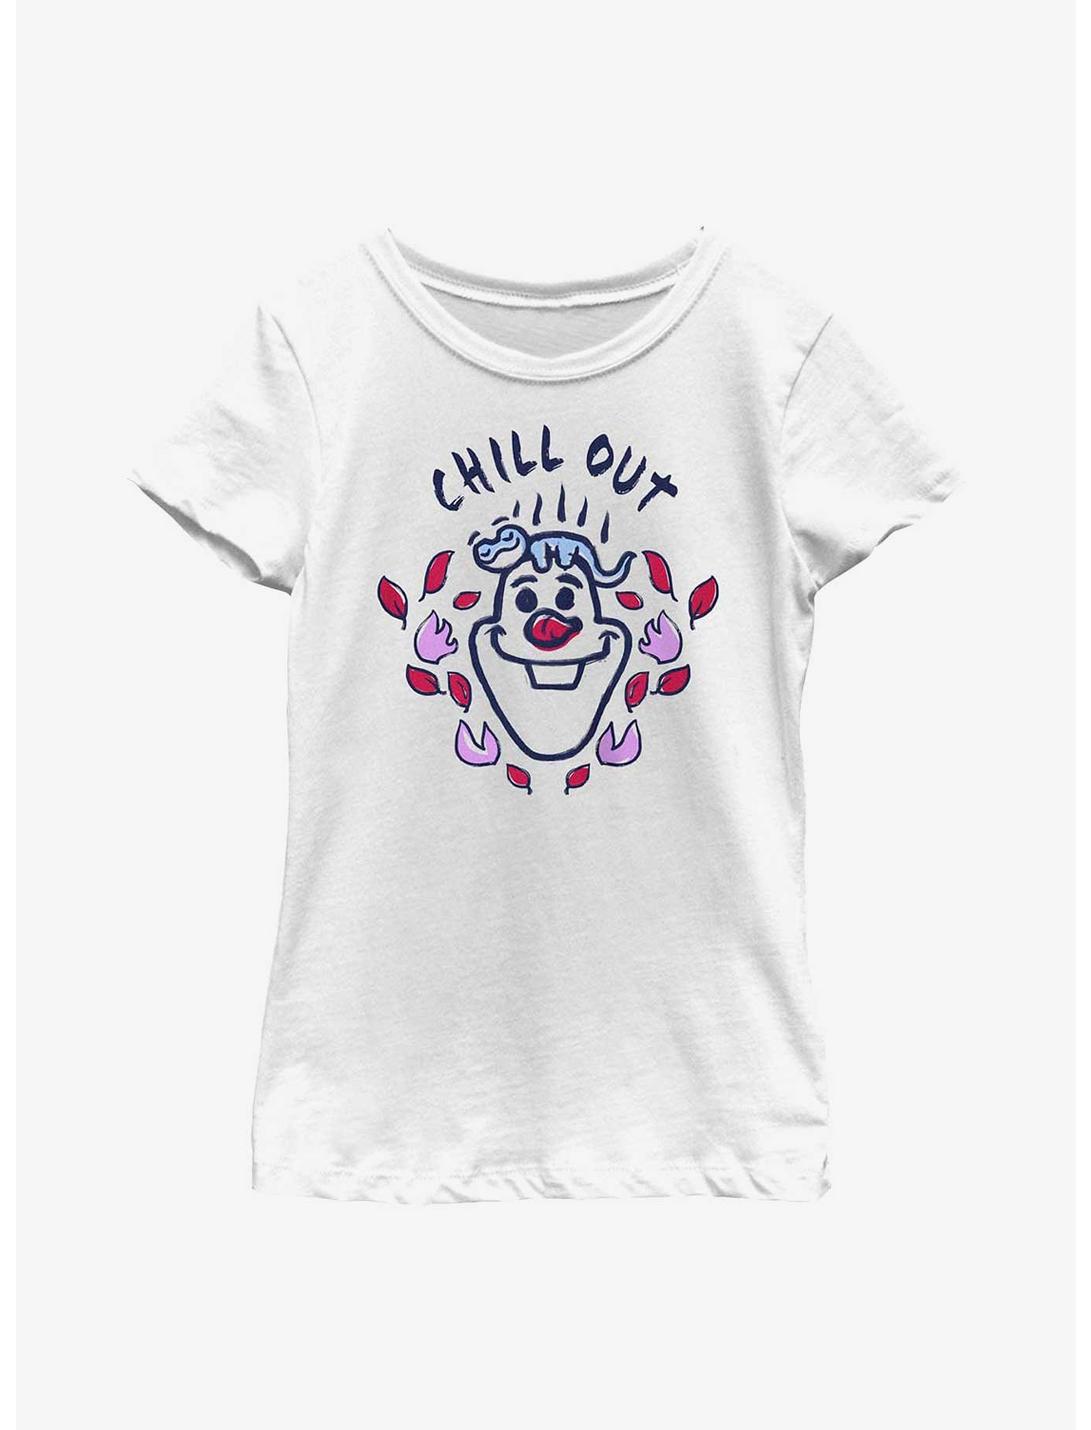 Disney Frozen 2 Olaf Chill OutYouth Girls T-Shirt, WHITE, hi-res